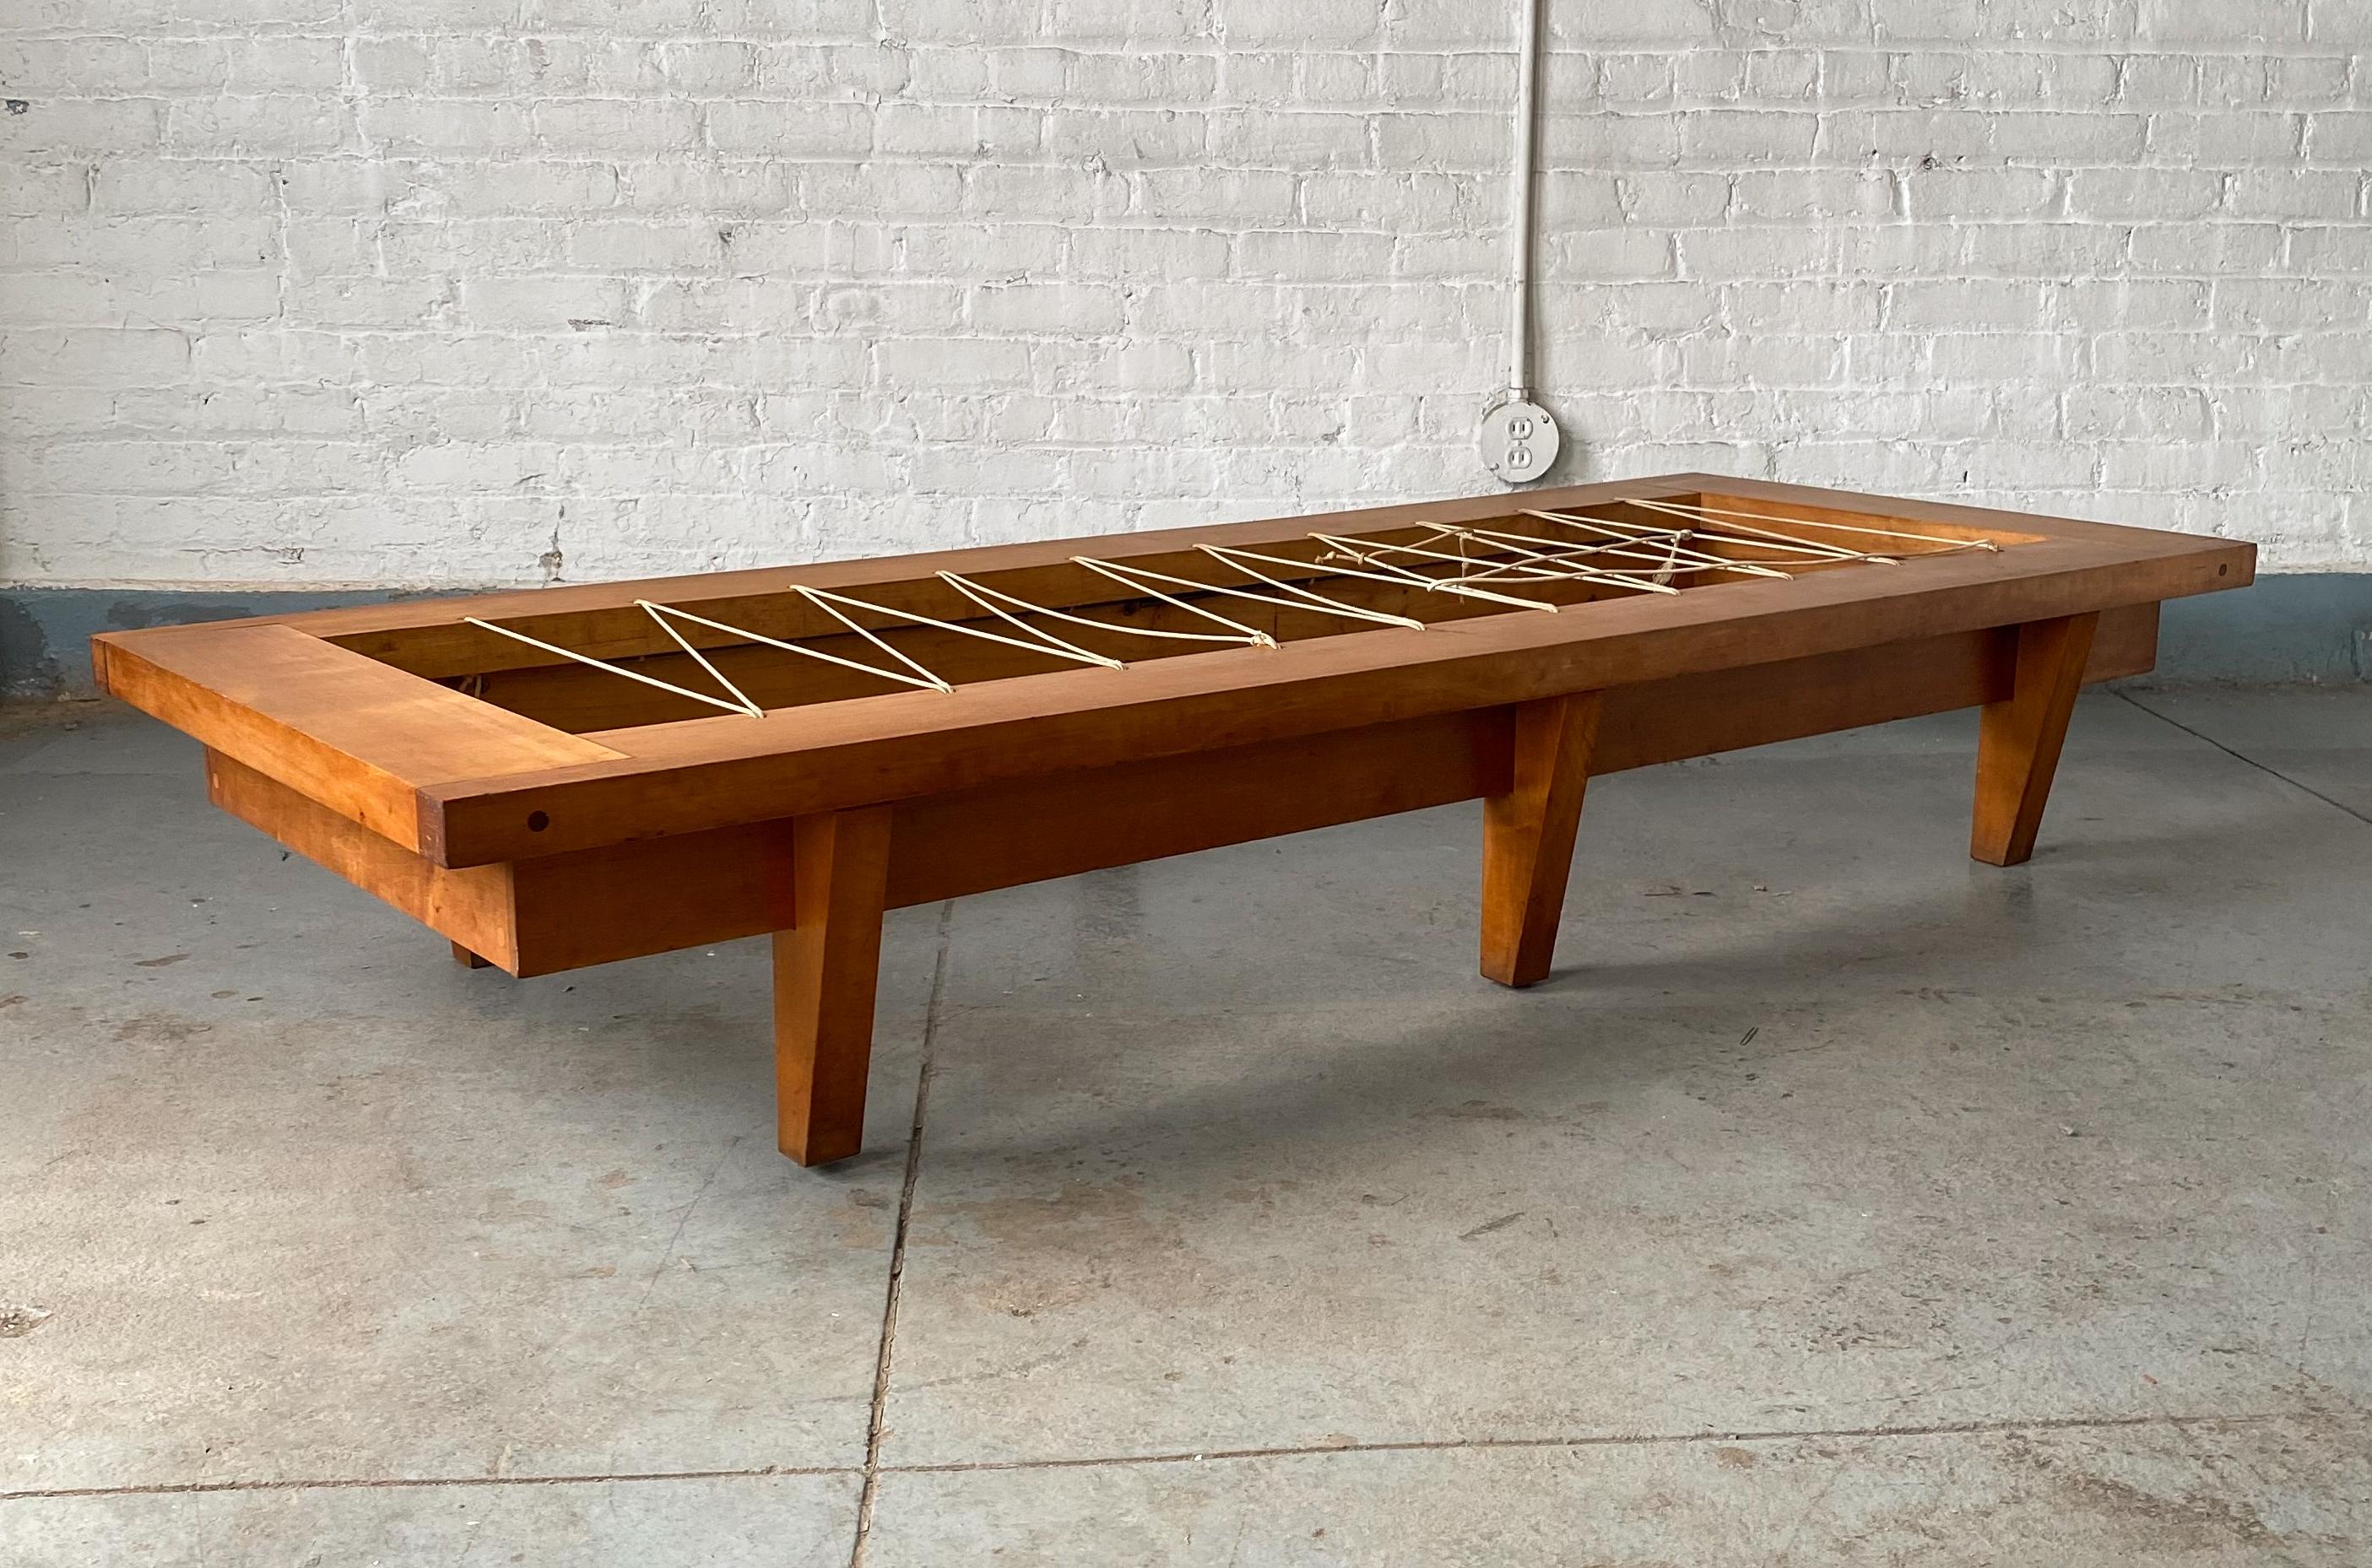 Soundly built and nicely proportioned daybed of solid maple with exposed dowel joints and an architectural bearing to the overhanging top and the angled legs. A studio production, circa 1970's, likely from the Northeast region. Zig-zag string